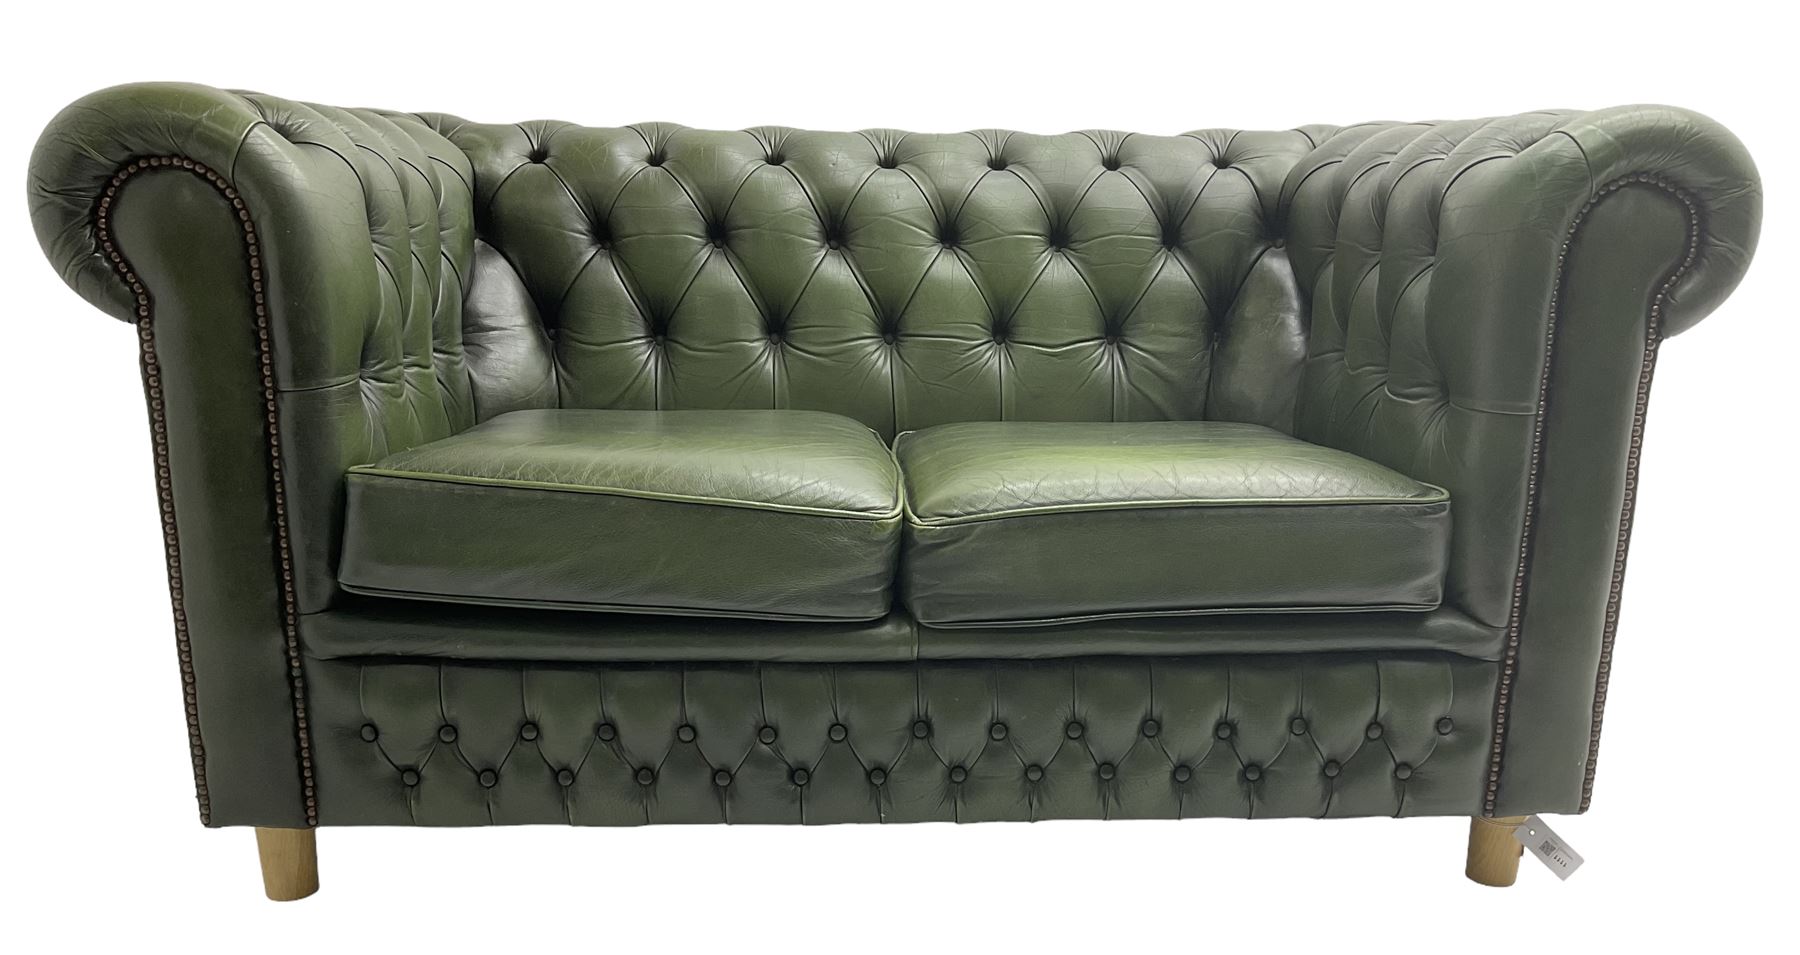 Chesterfield style two seat sofa upholstered in buttoned green leather with stud work - Image 5 of 5